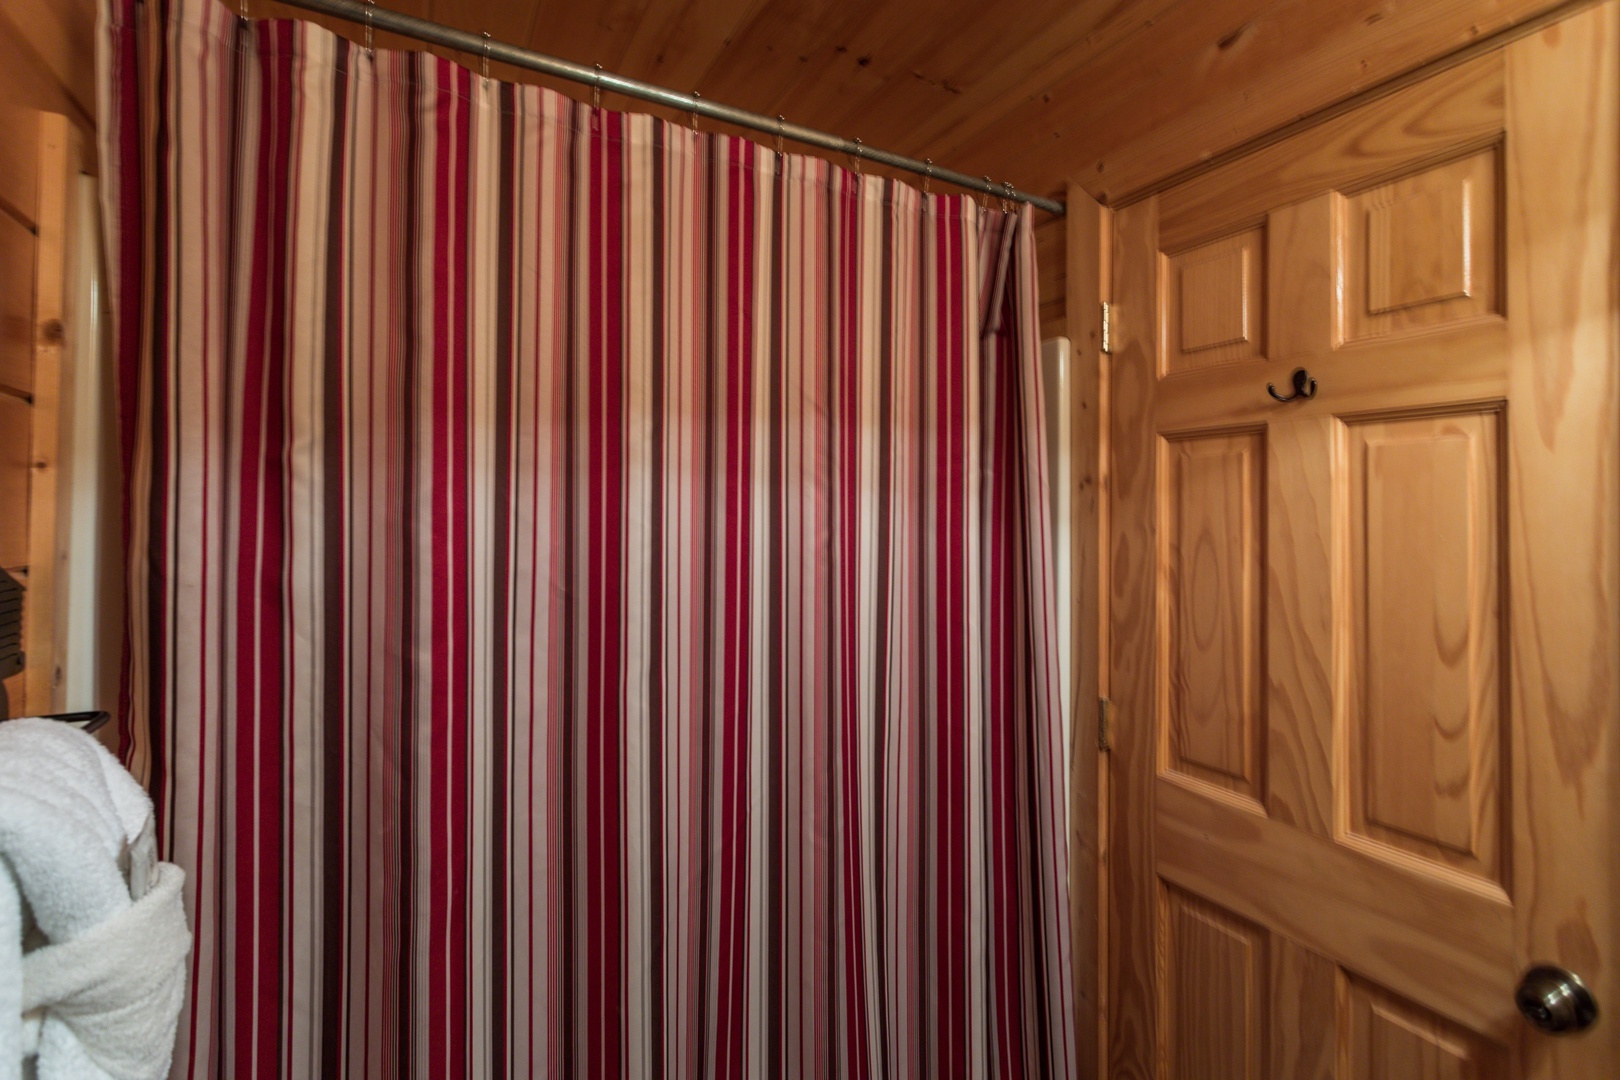 Shower in the bathroom at Better View, a 4 bedroom cabin rental located in Pigeon Forge